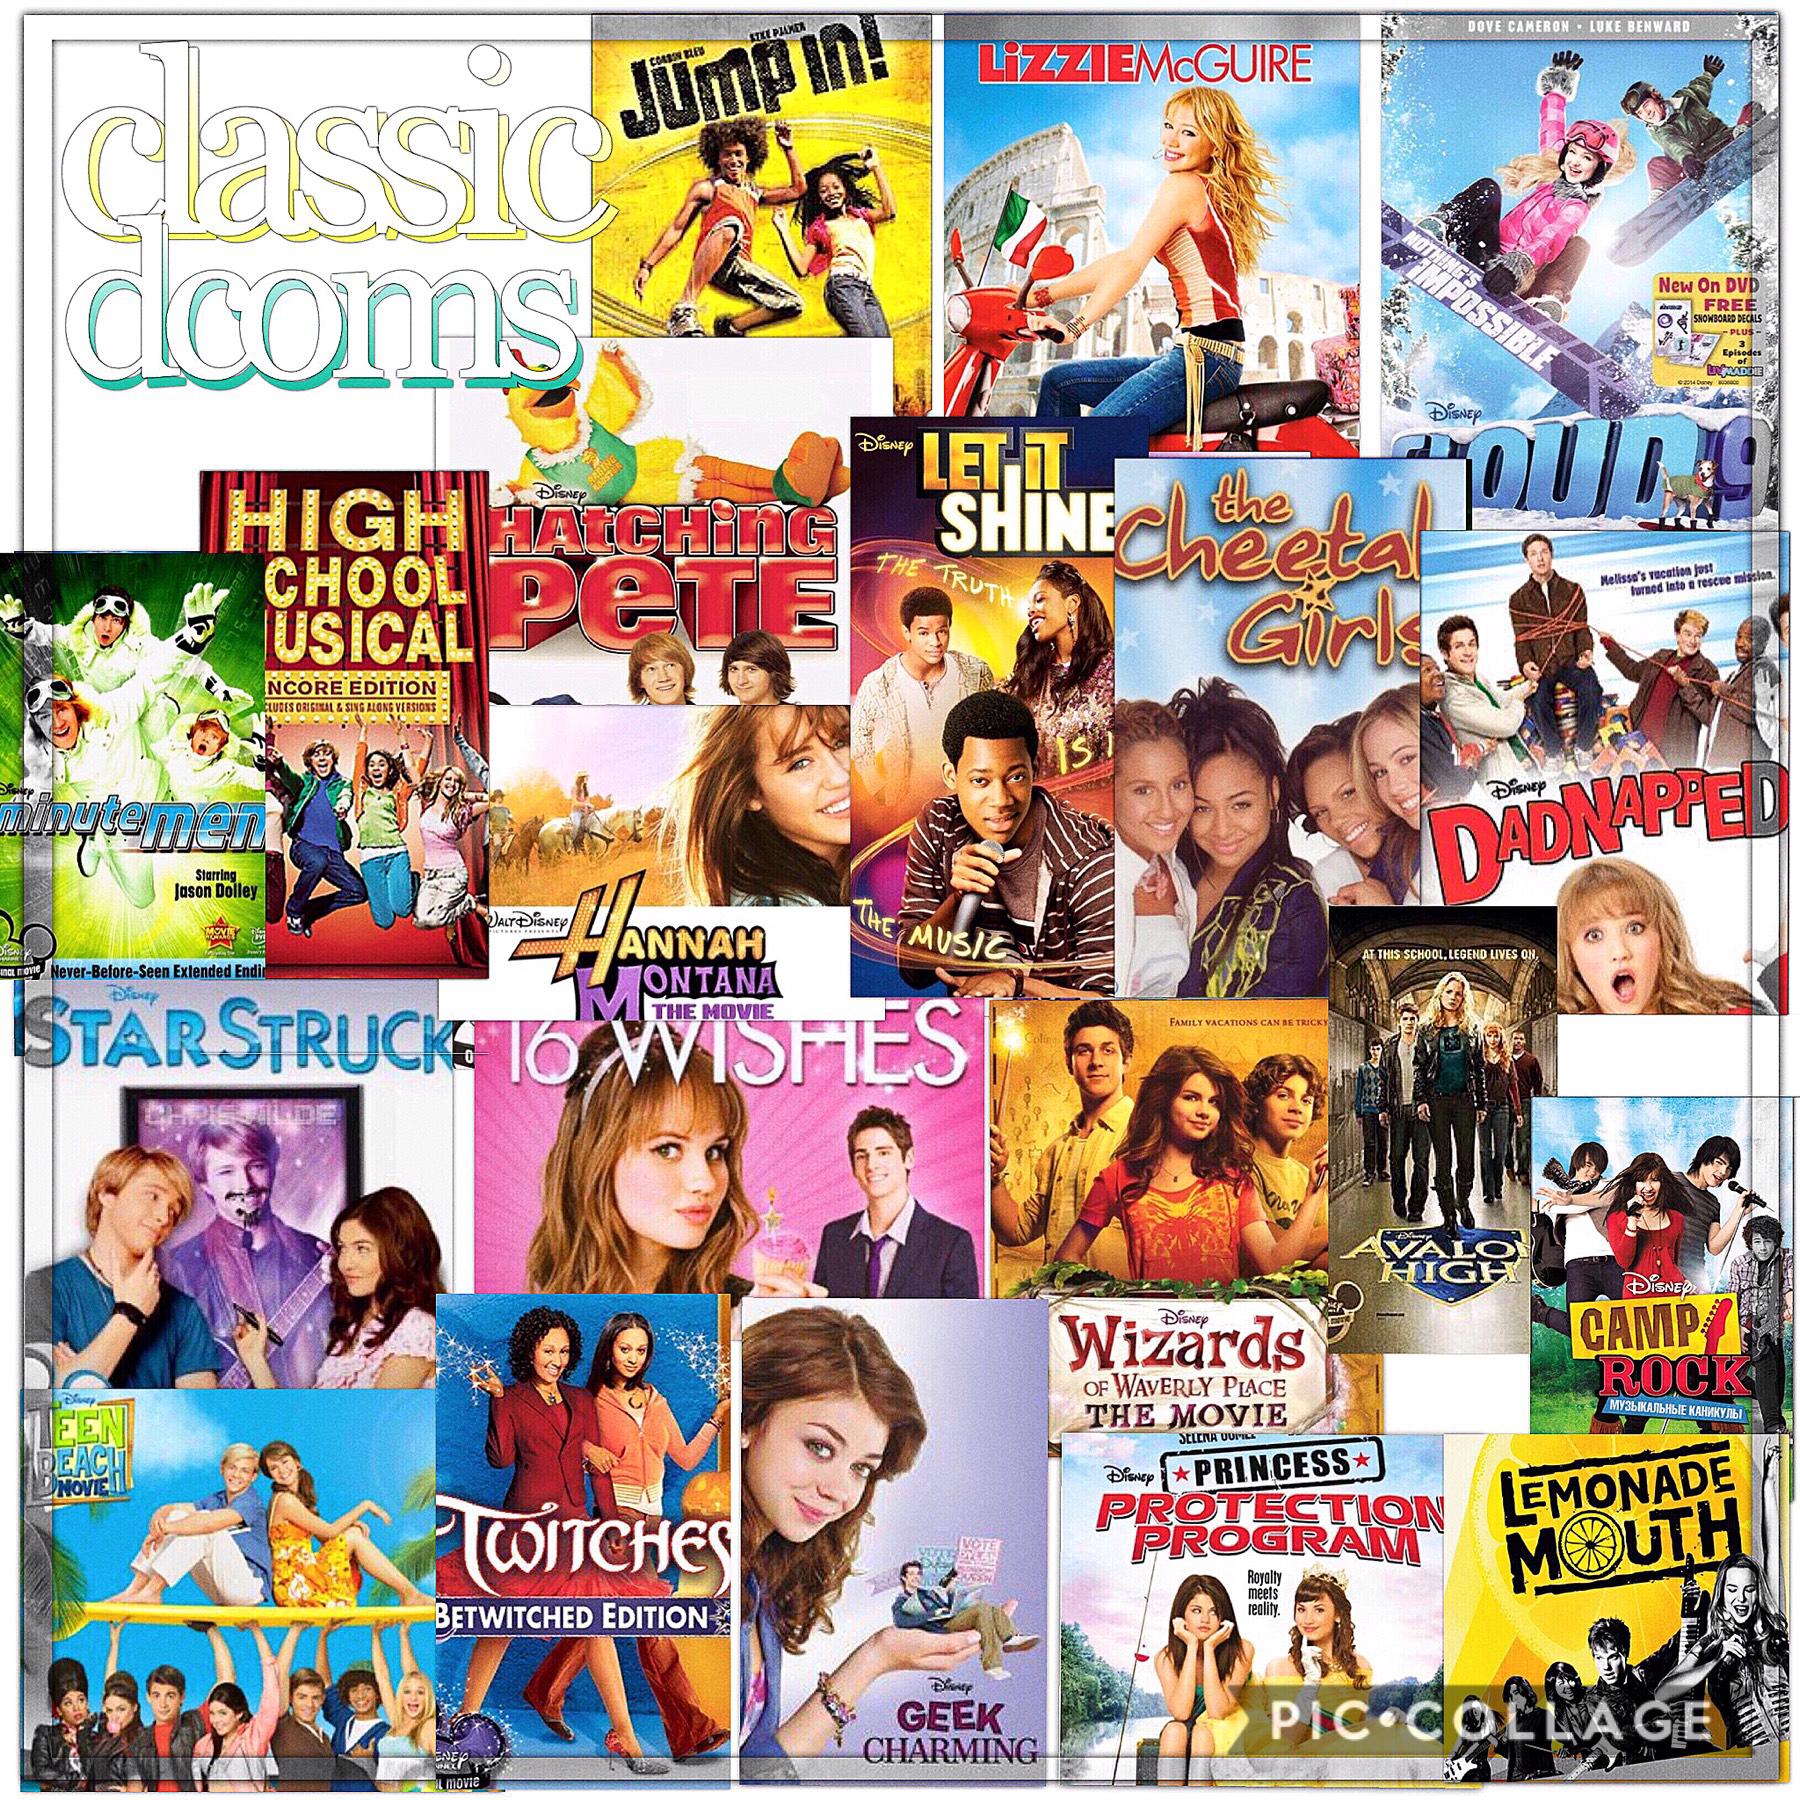 my favorites were let it shine, lemonade mouth, and Avalon high !! Comment what yours were